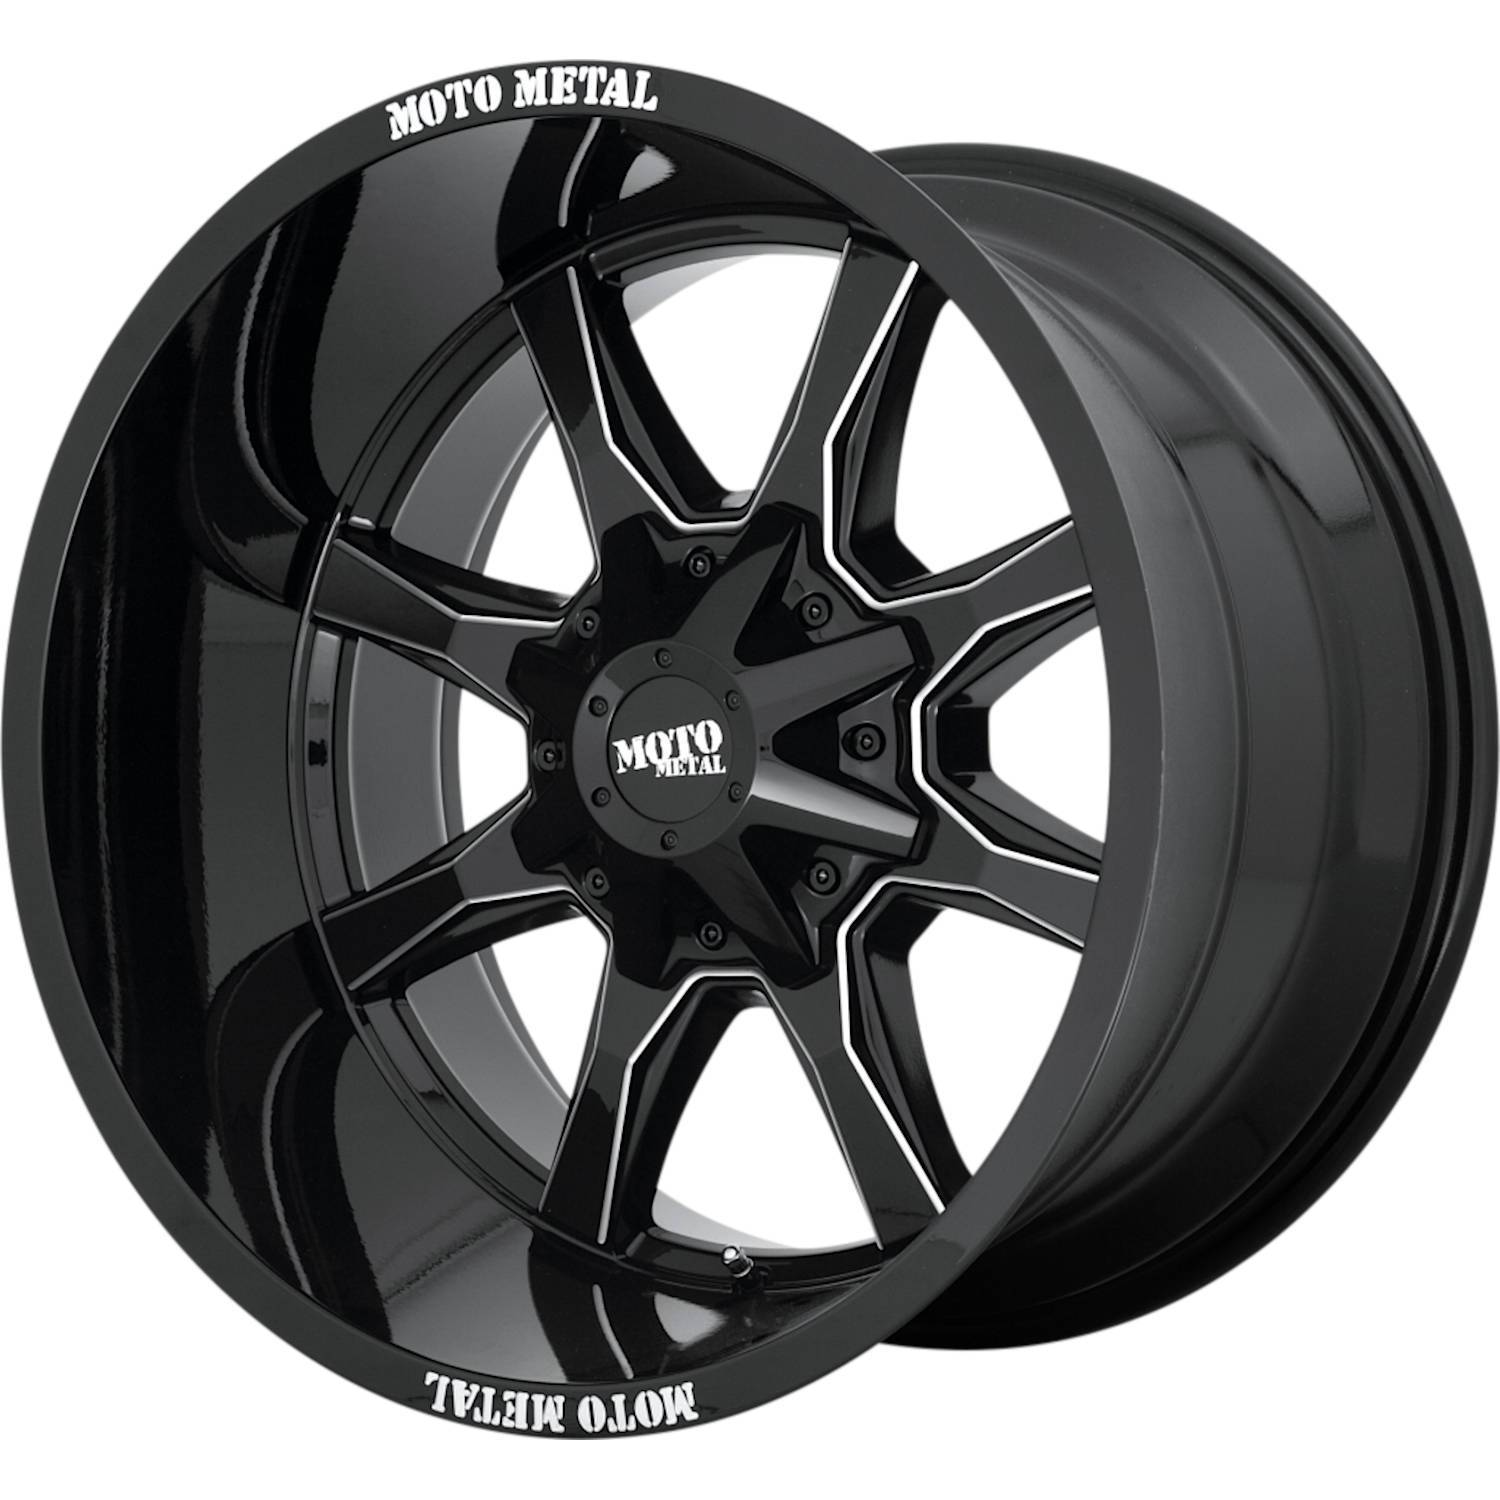 Moto Metal MO970 20x9 0 6x135/6x139.7 (6x5.5) Gloss Black with Milled Spoke Edges - Tires and Engine Performance